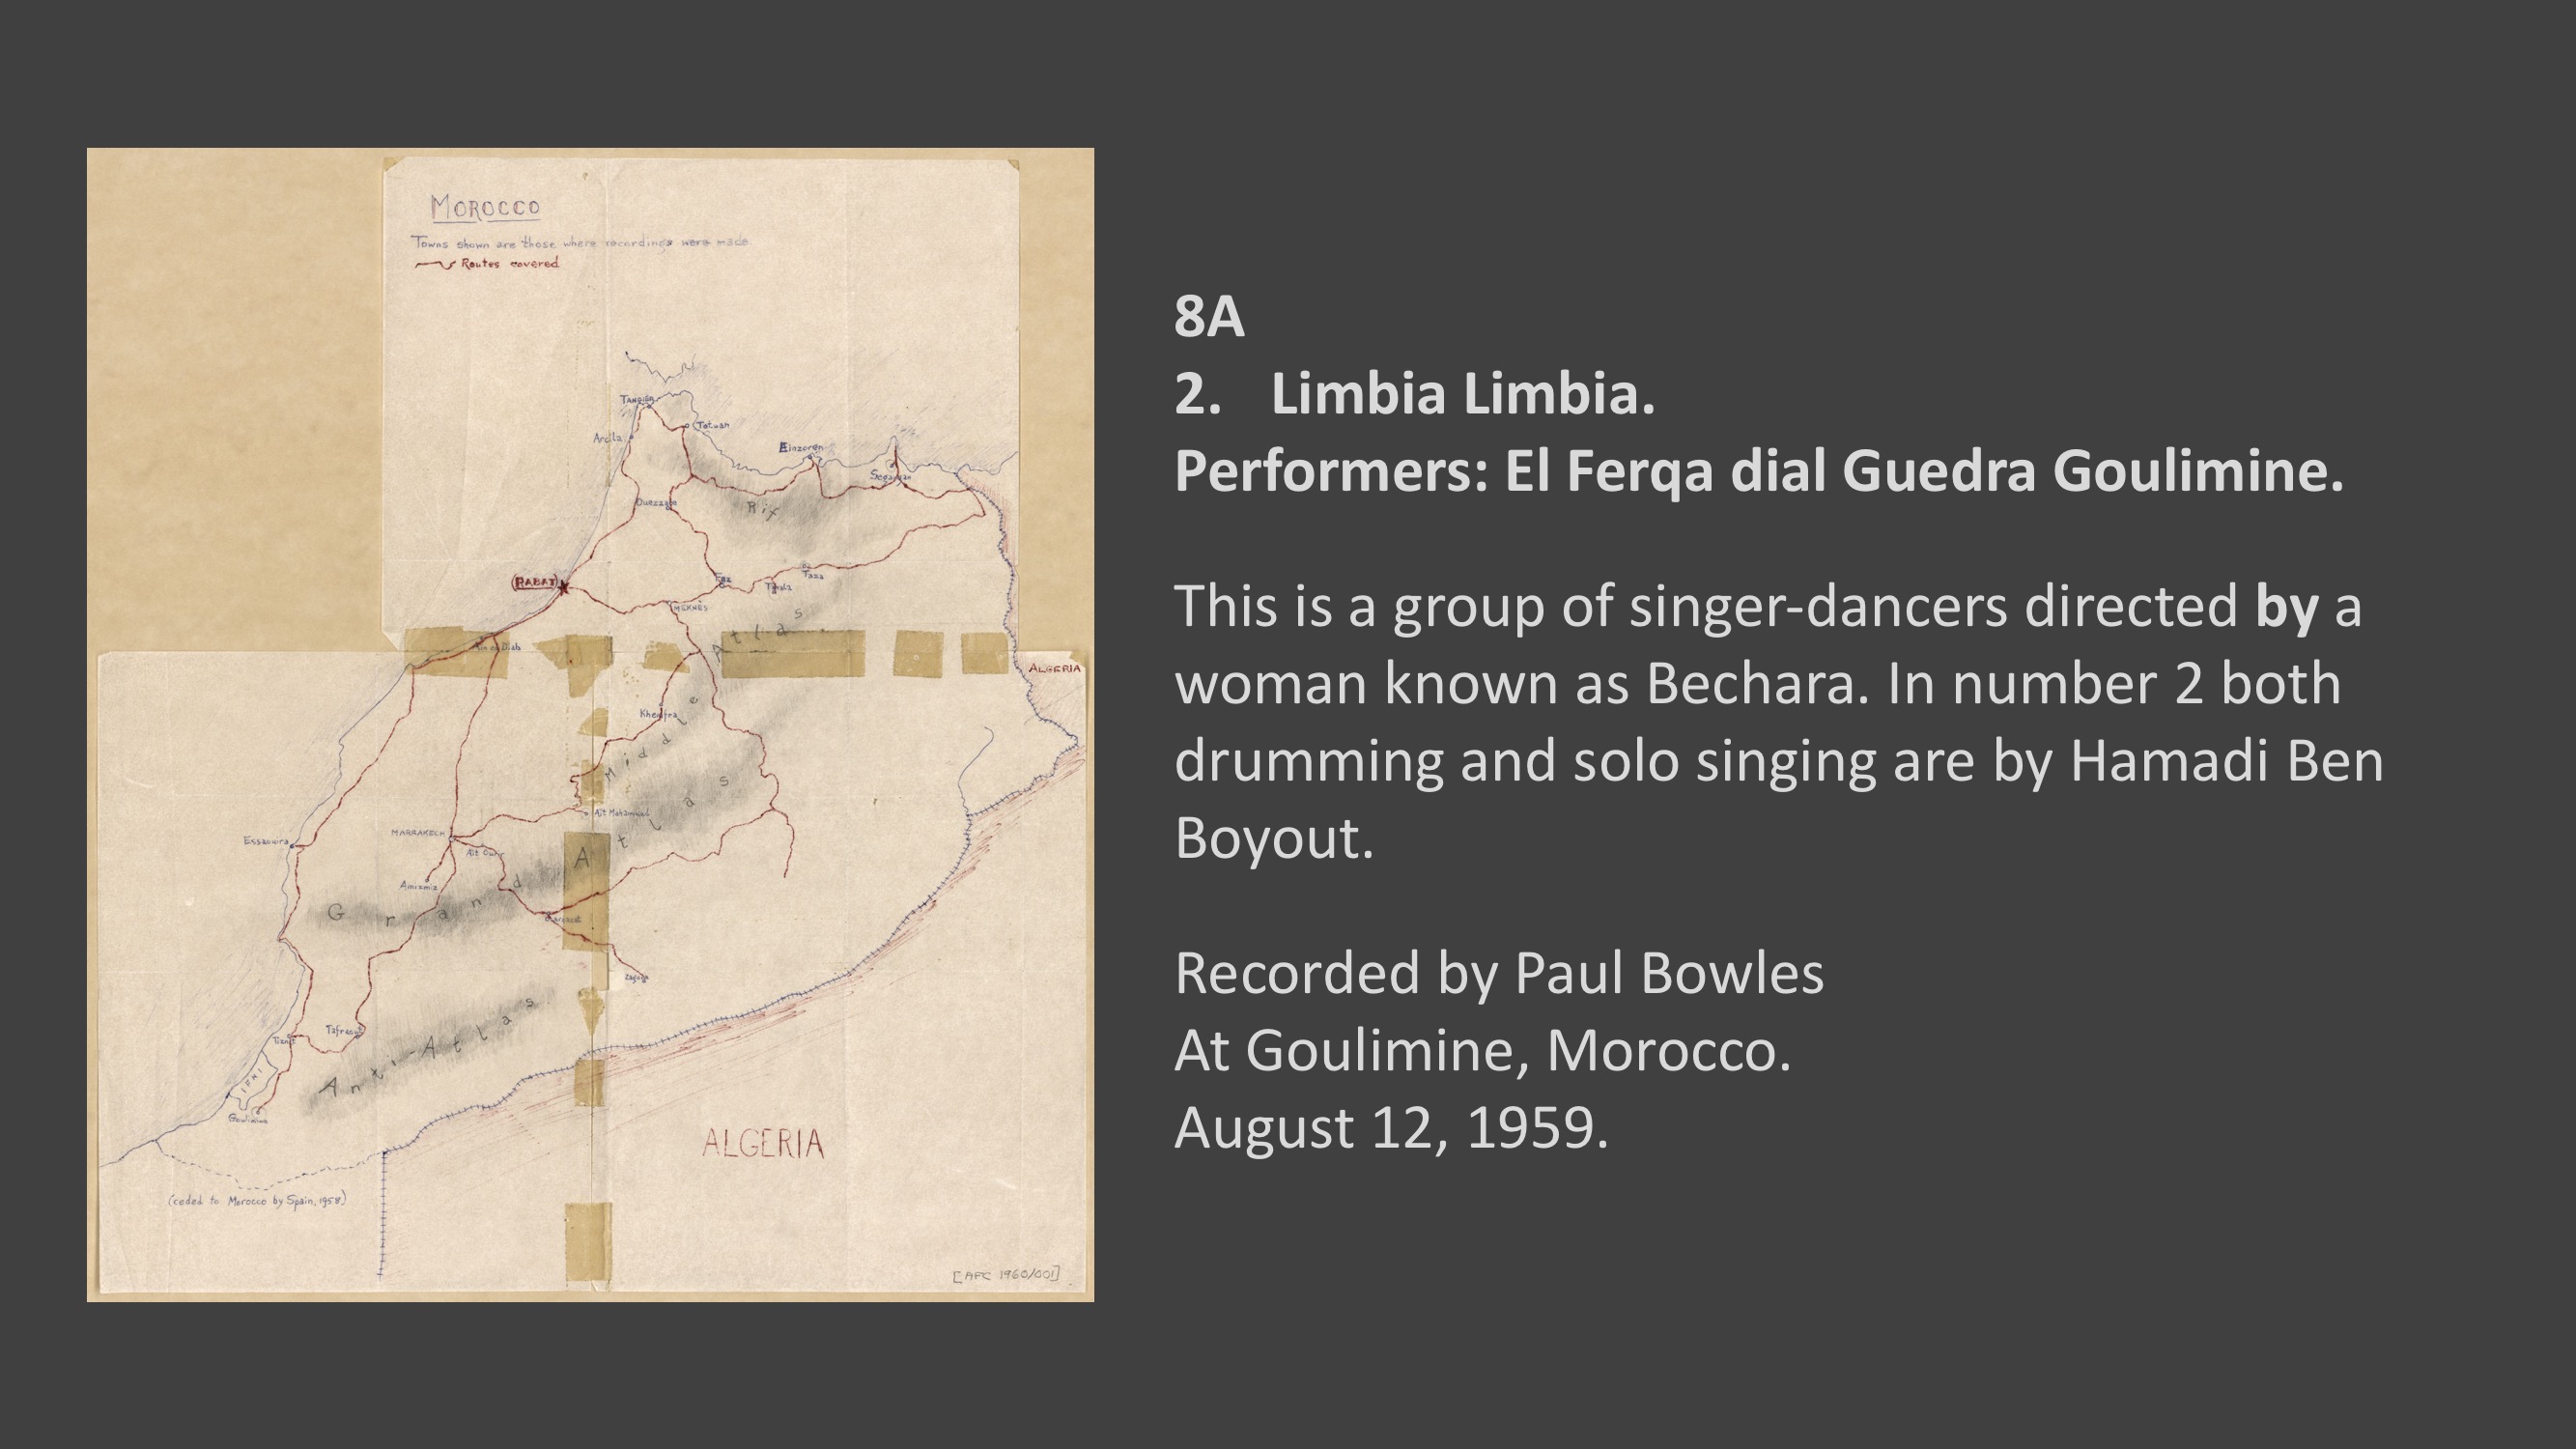 Hamadi Ben Boyout - 8A.2 Guennou Ouahib Bouir.
Performers: El Ferqa dial Guedra Goulimine 

In number 2 both drumming and solo singing are by Hamadi Ben Boyout.


Recorded by Paul Bowles at Goulimine, Moroccan Sahara.
August 12, 1959
